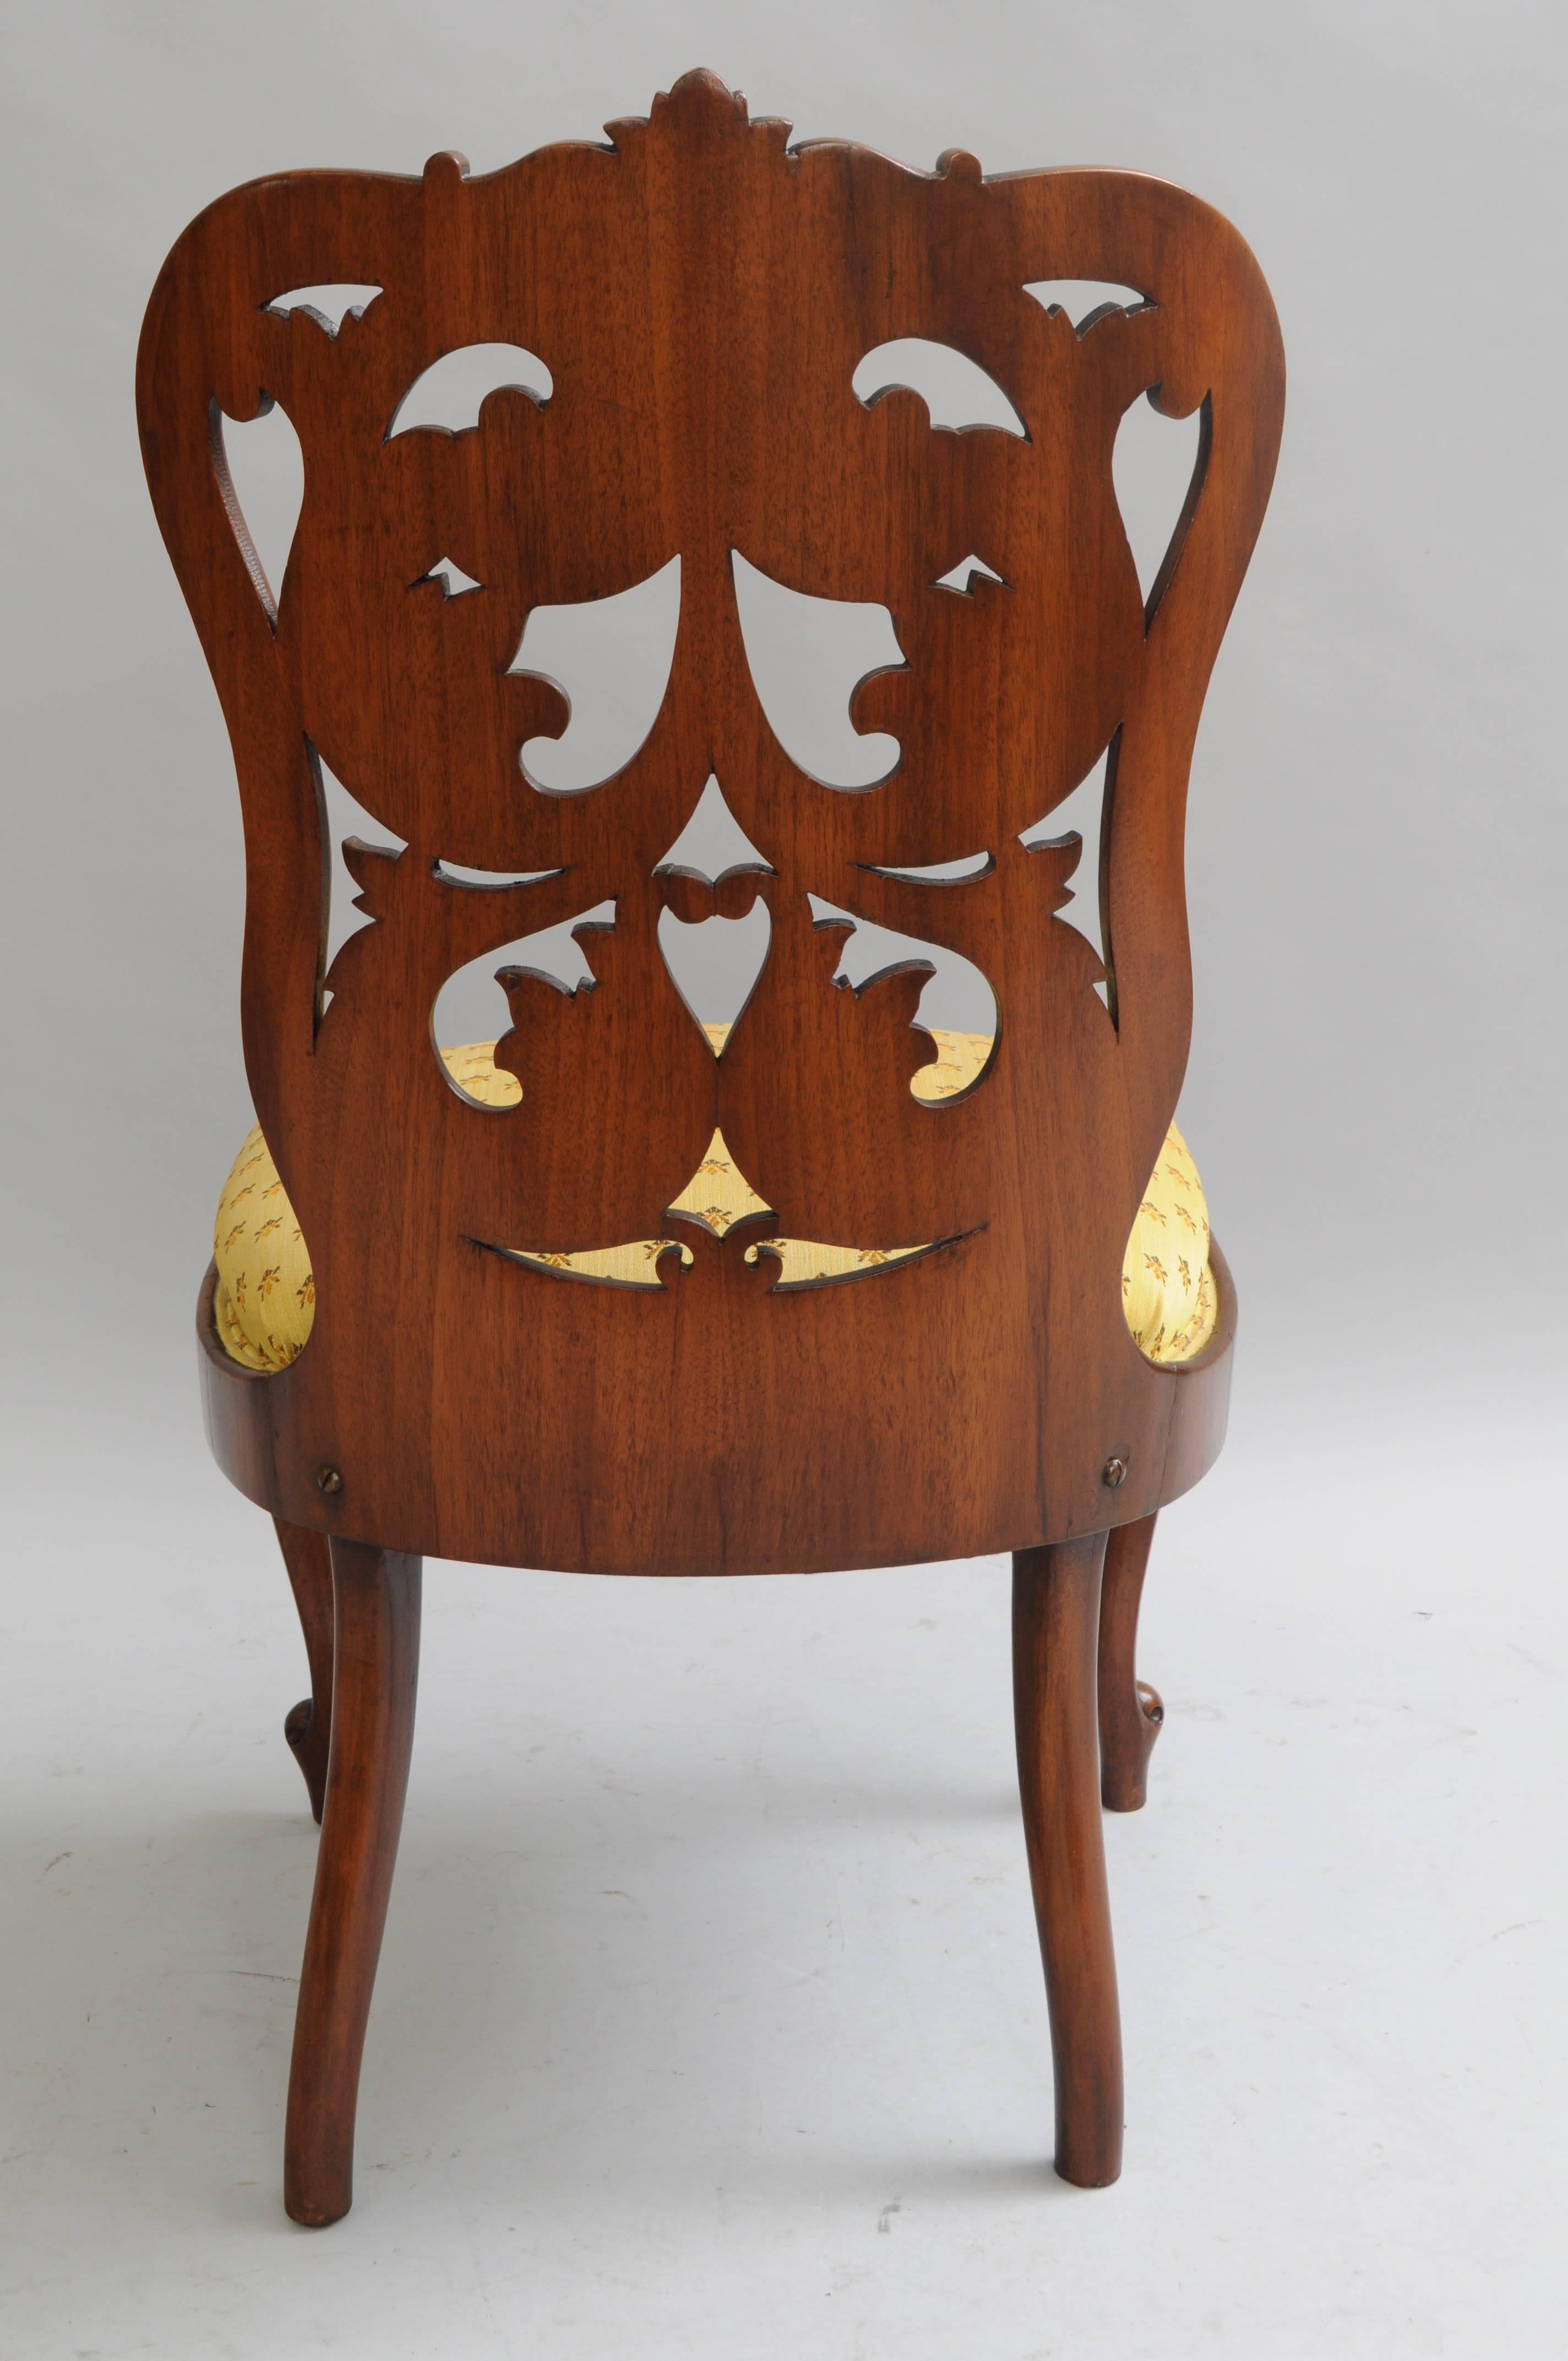 rococo revival chairs